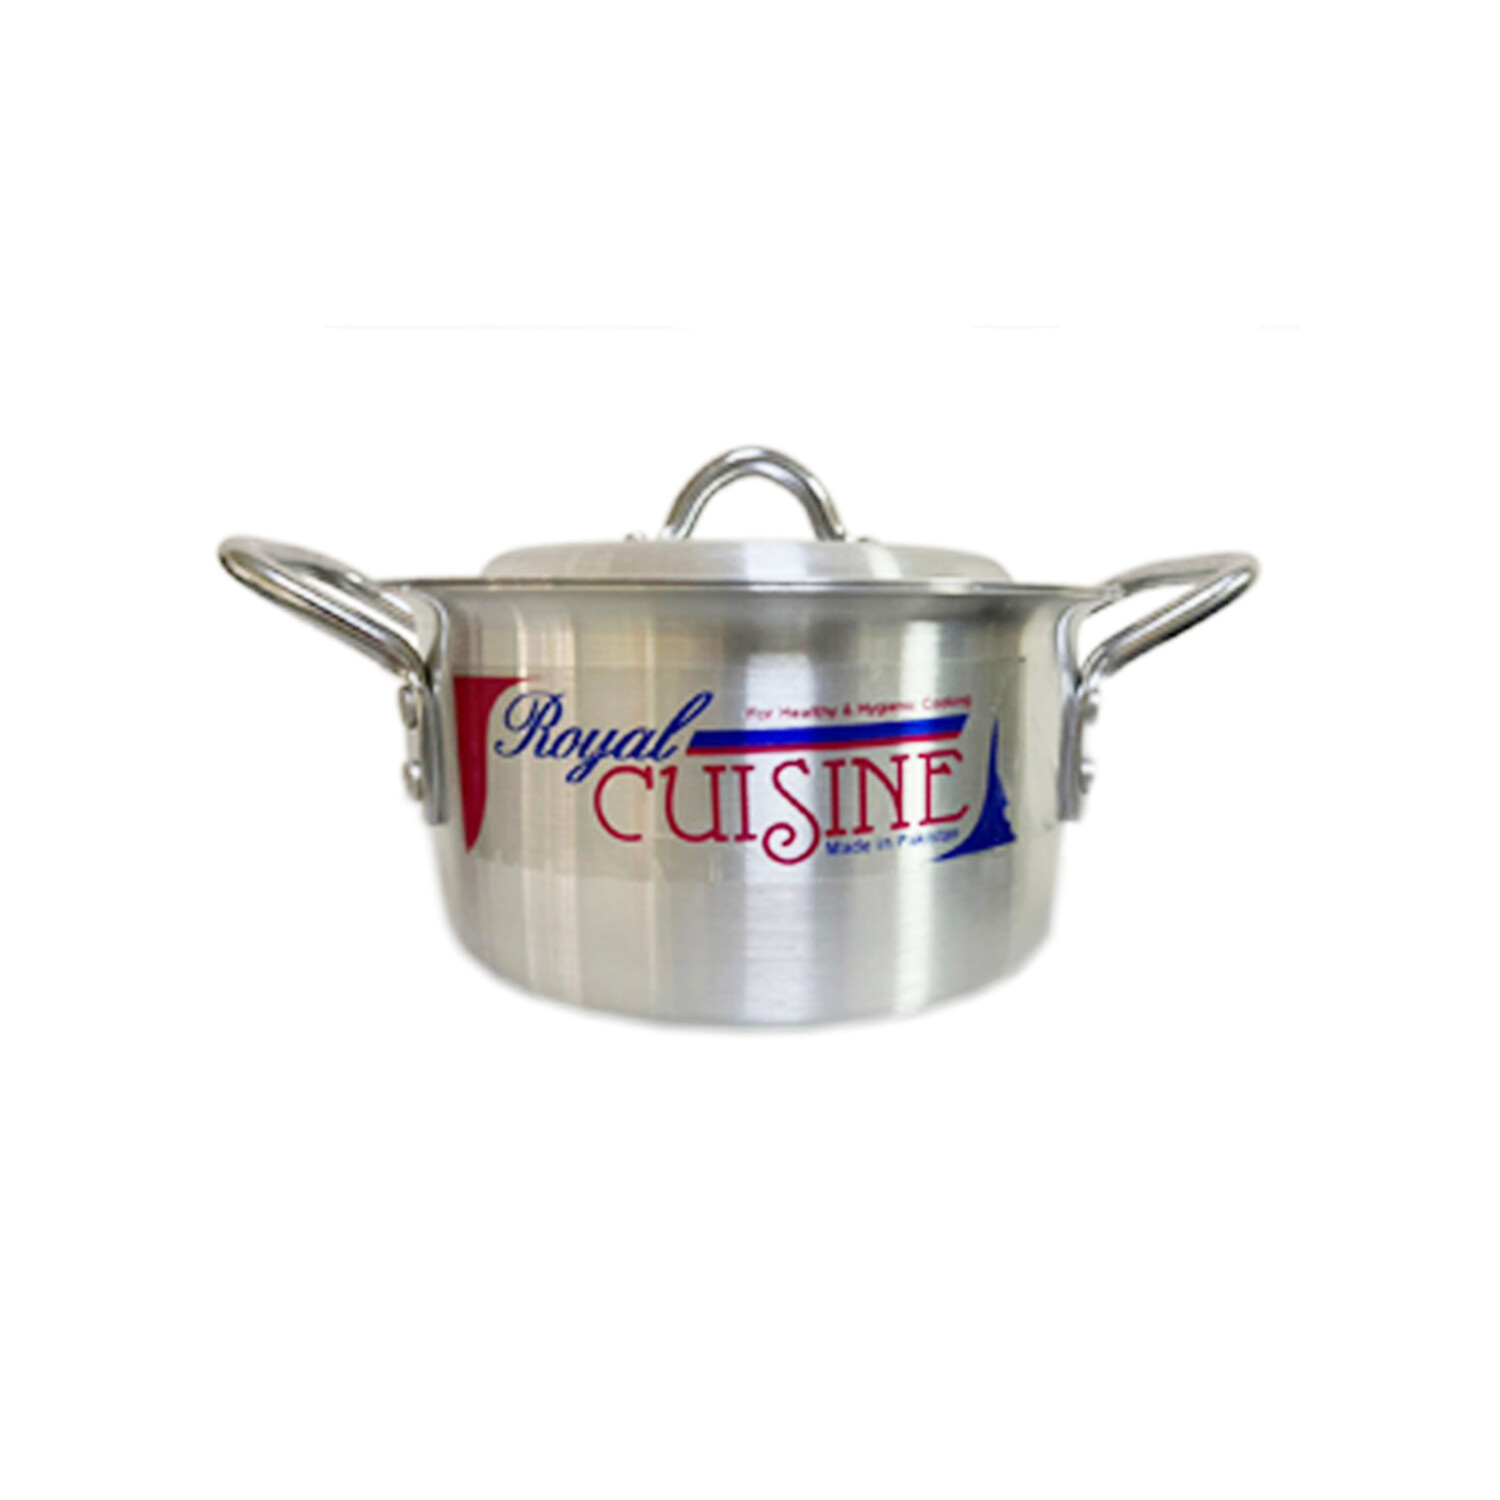 Royal Cuisine Metal Finish Chef Cooking Pots 4 Pcs Set 11x14 (Size 45/50/55/61) Cm With Durable Handles And Heavy Lids Original Made In Pakistan